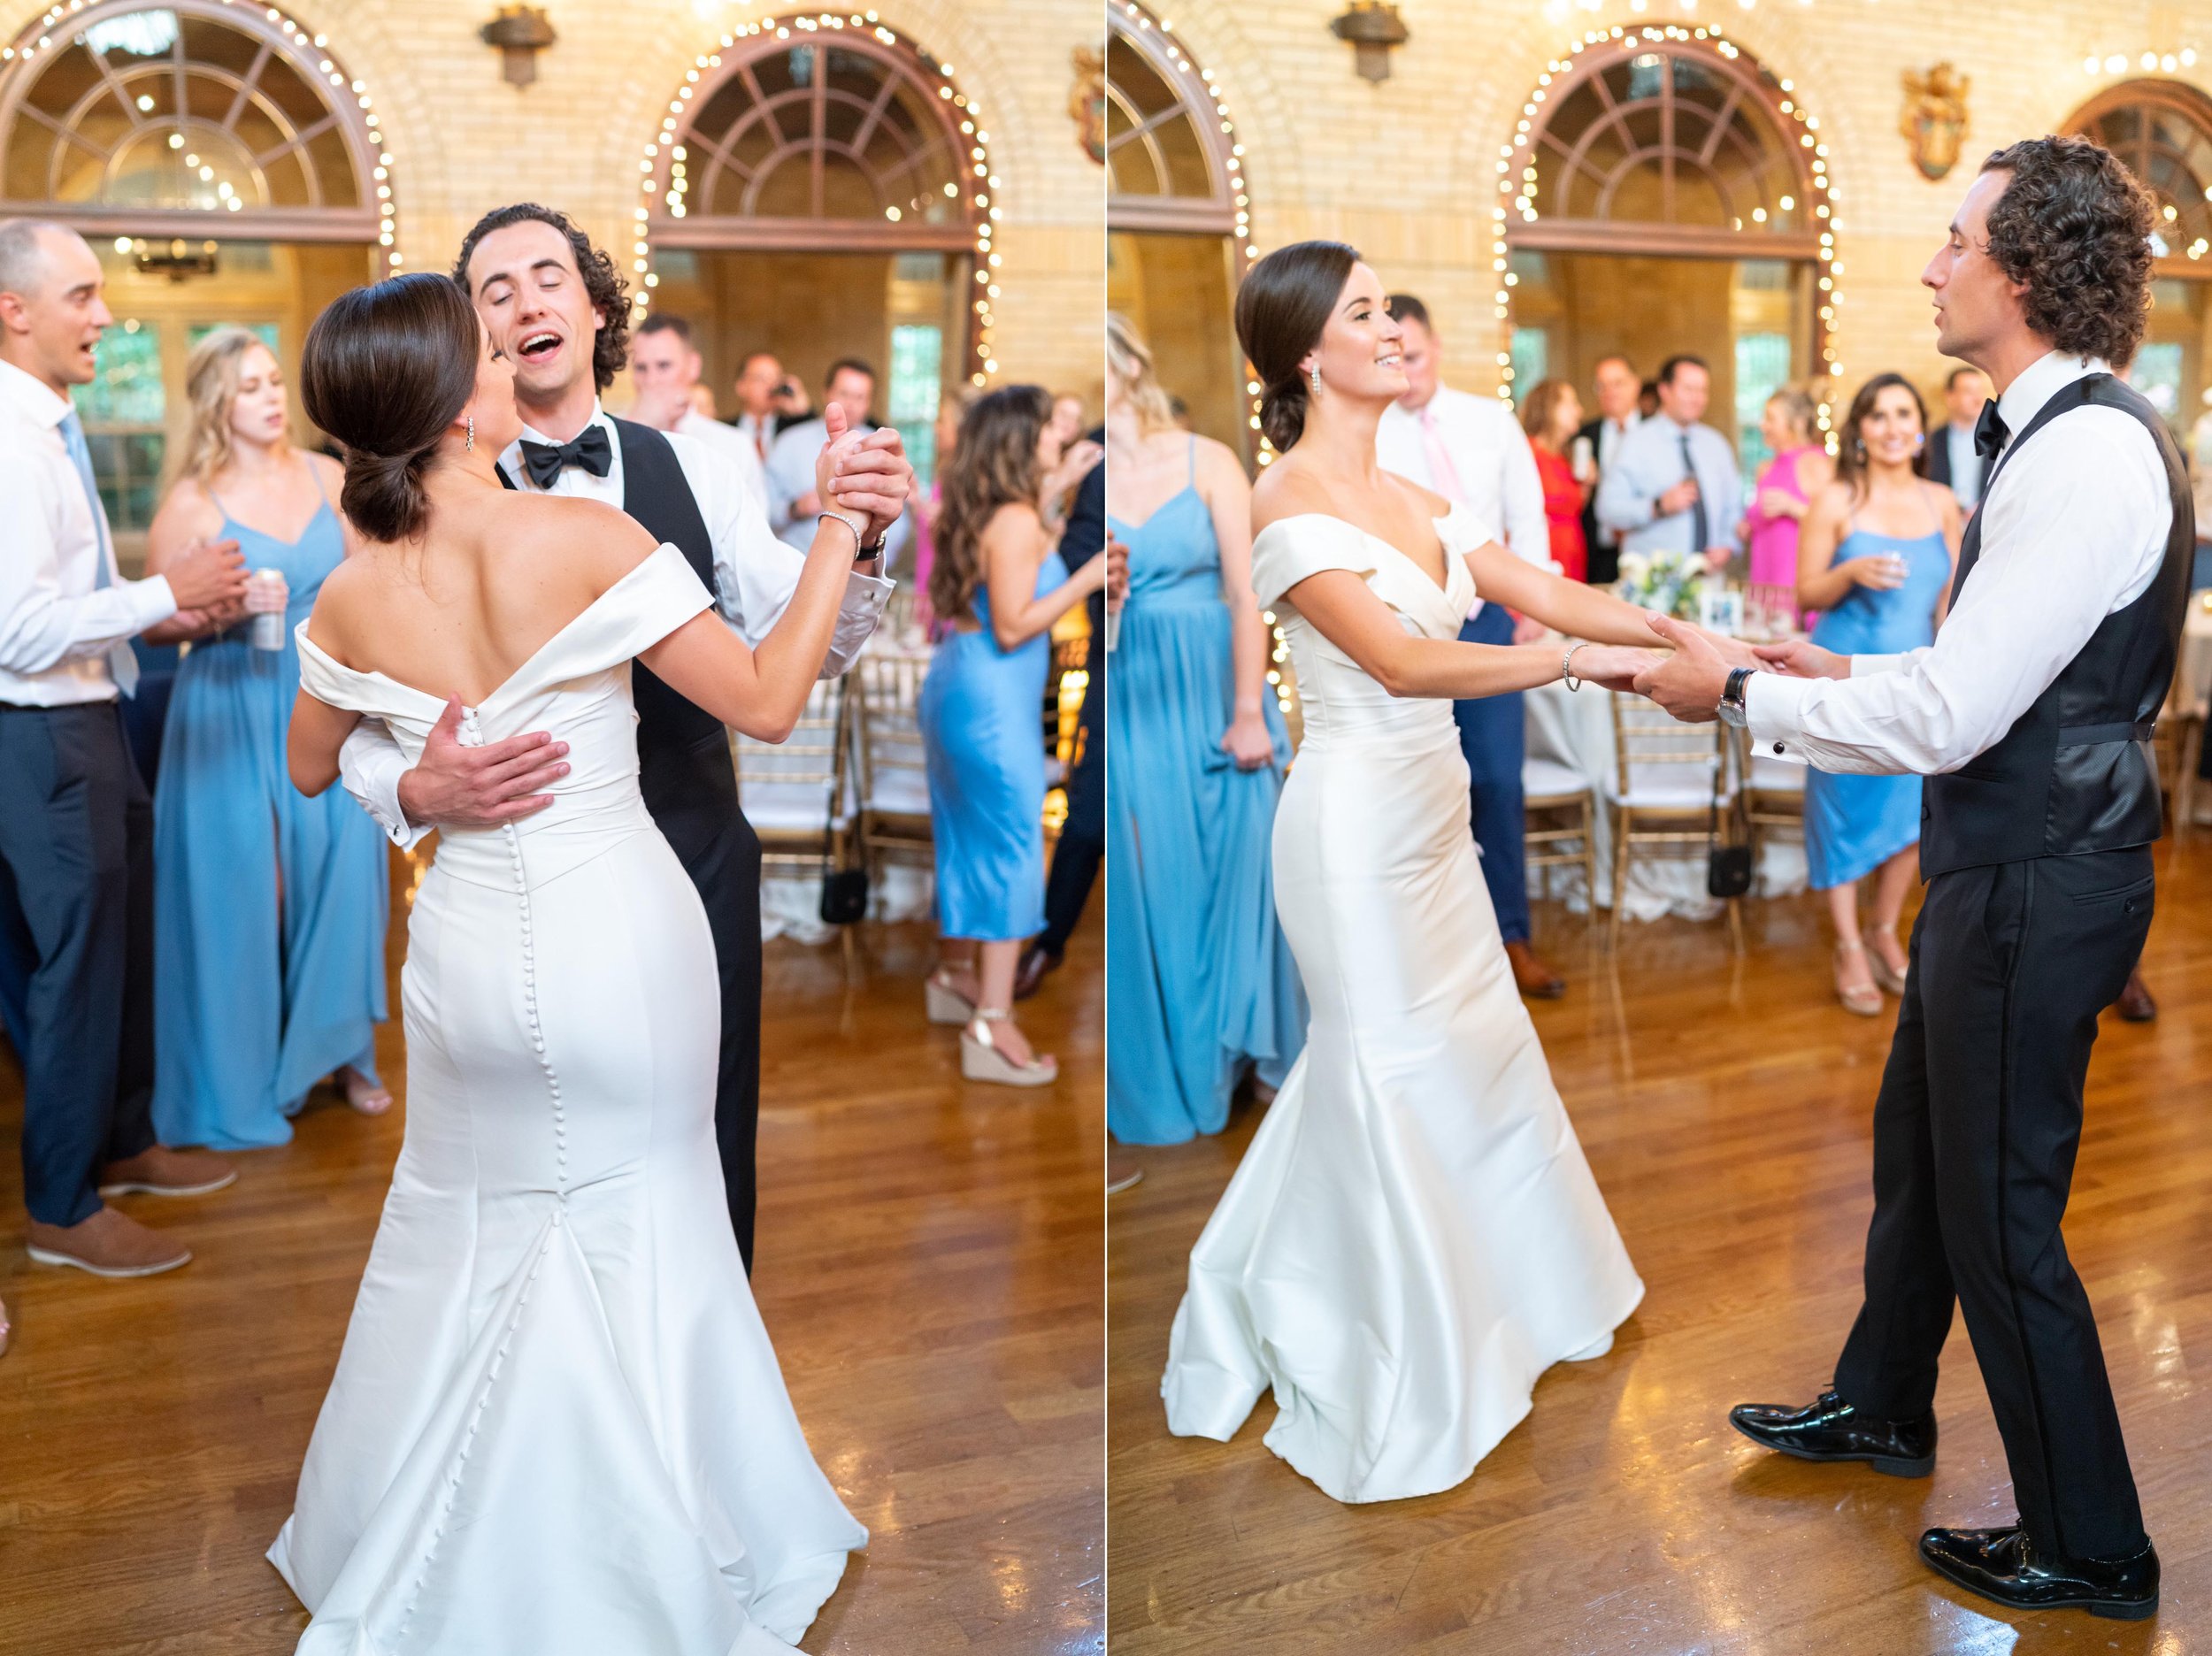 bride and brother dancing at wedding reception photos at st Francis hall in dc